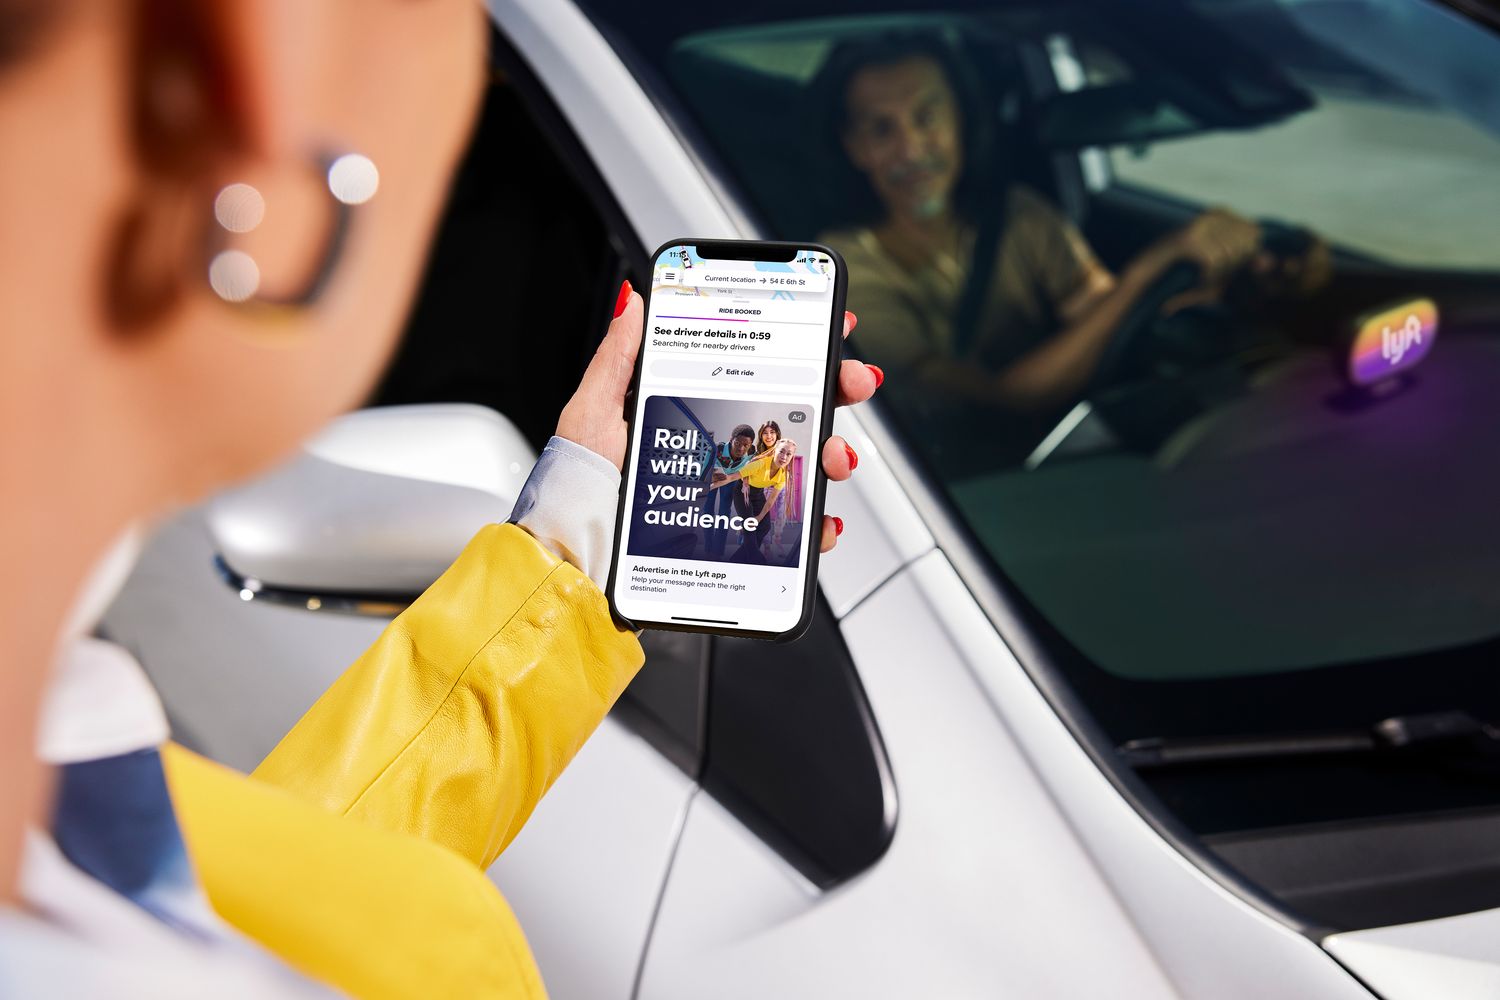 lyft-is-testing-a-mid-ride-feedback-option-for-its-ridesharing-app